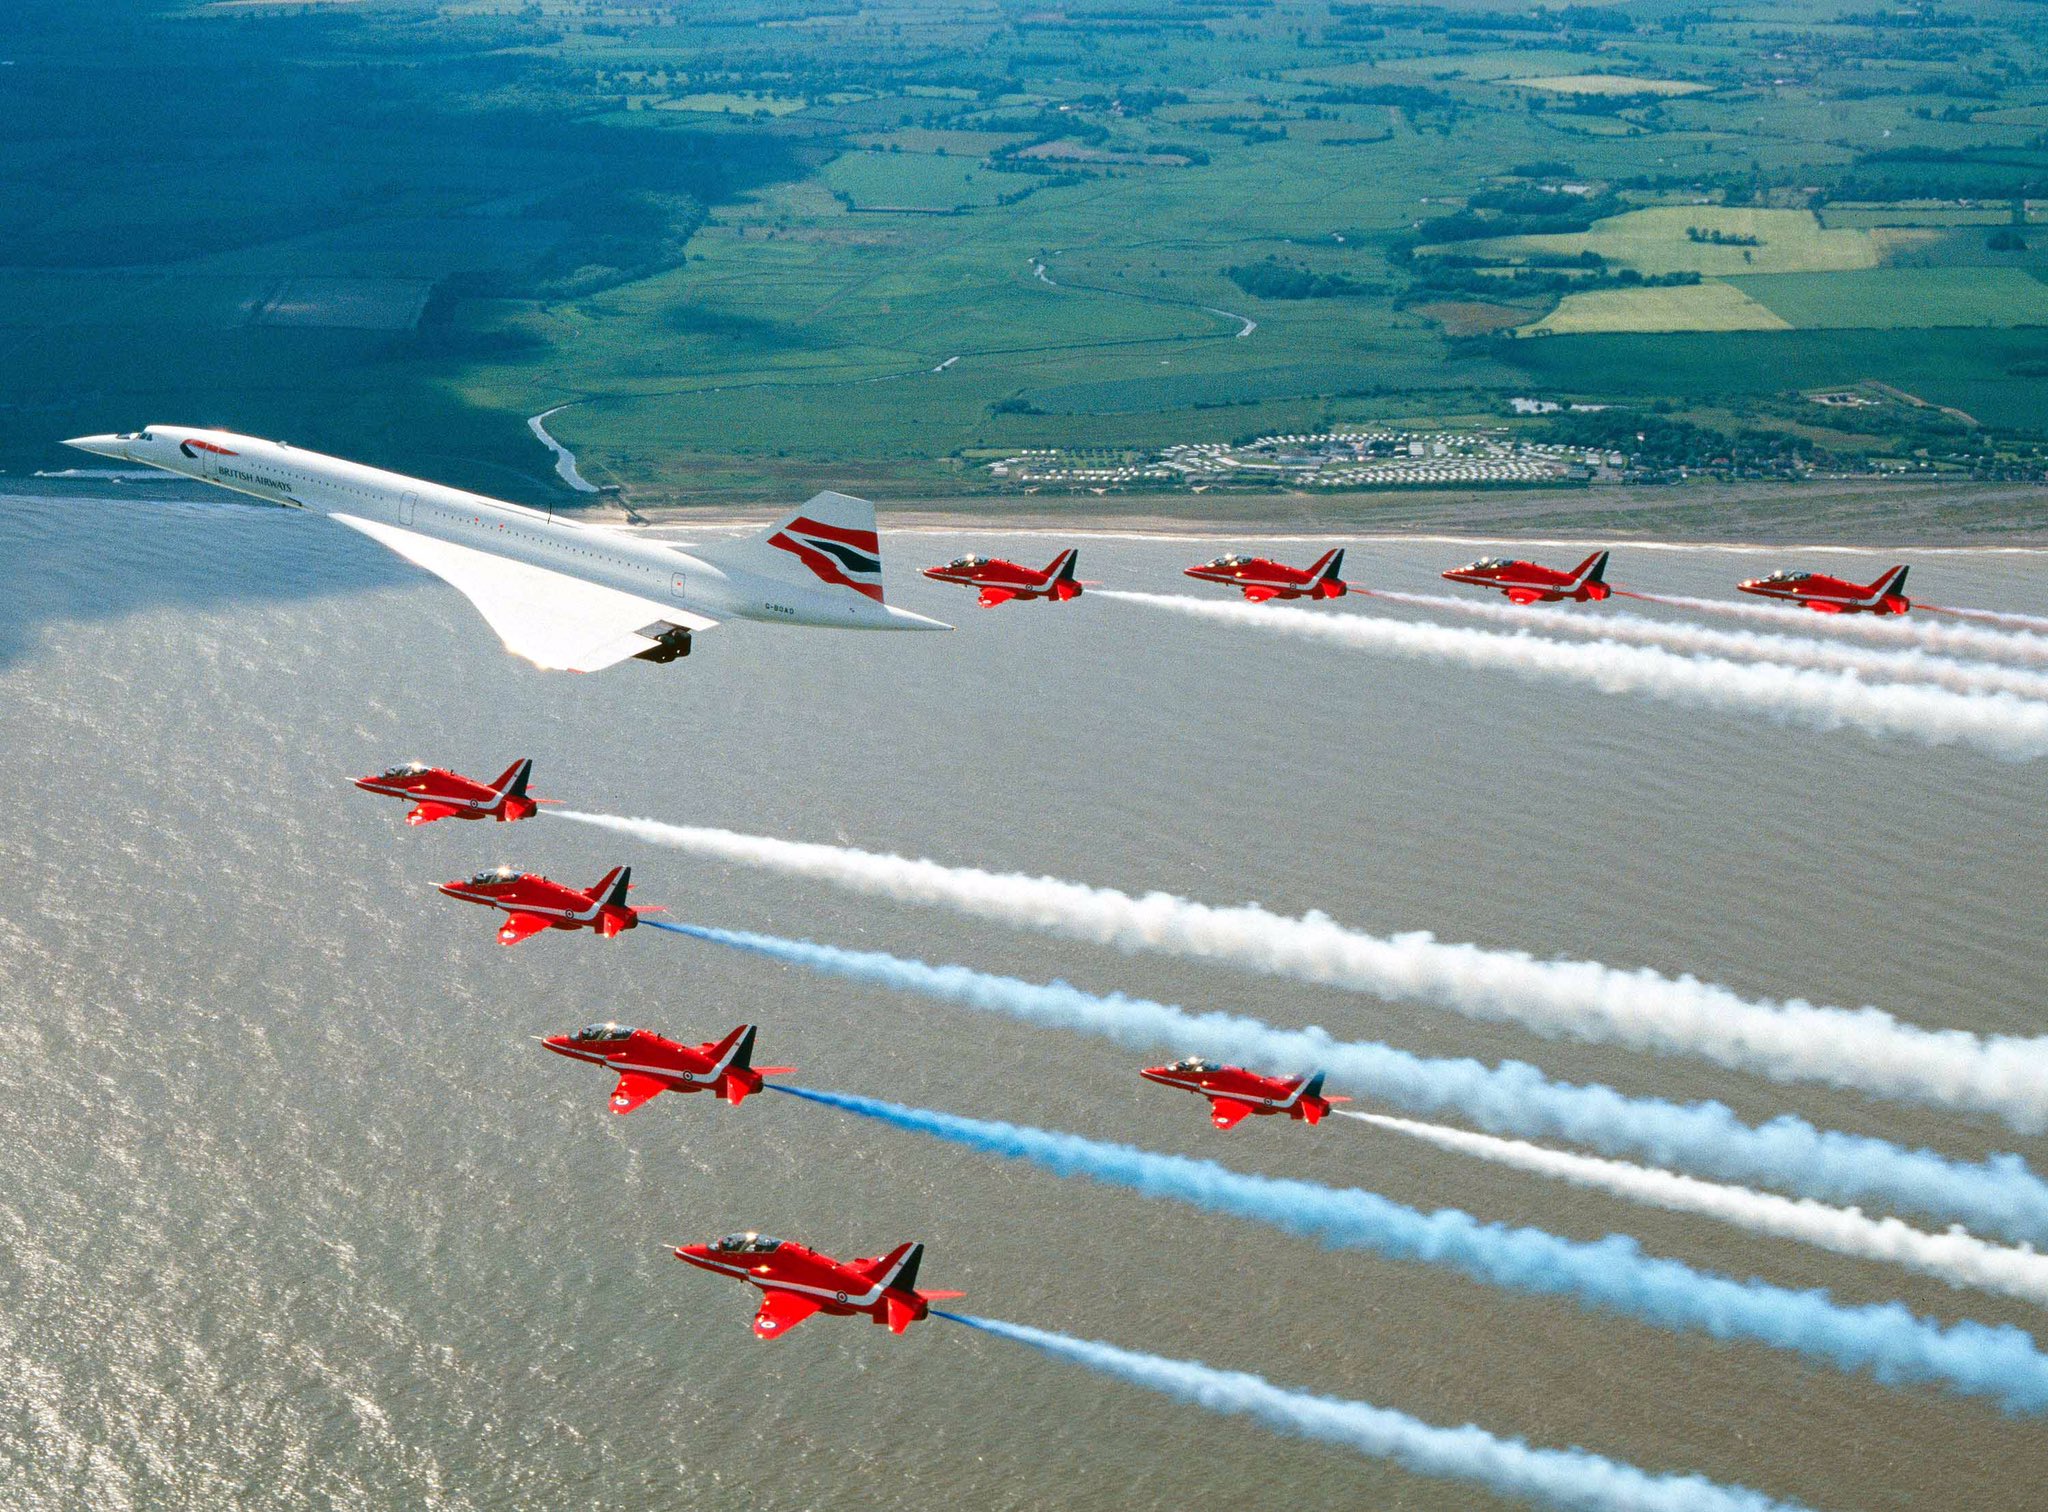 Red Arrows on Twitter: and precision: Here's a glorious picture from our to celebrate the 50th anniversary today of maiden flight. #Concorde #Concorde50 #redarrows https://t.co/FROcLXAU9N" / Twitter